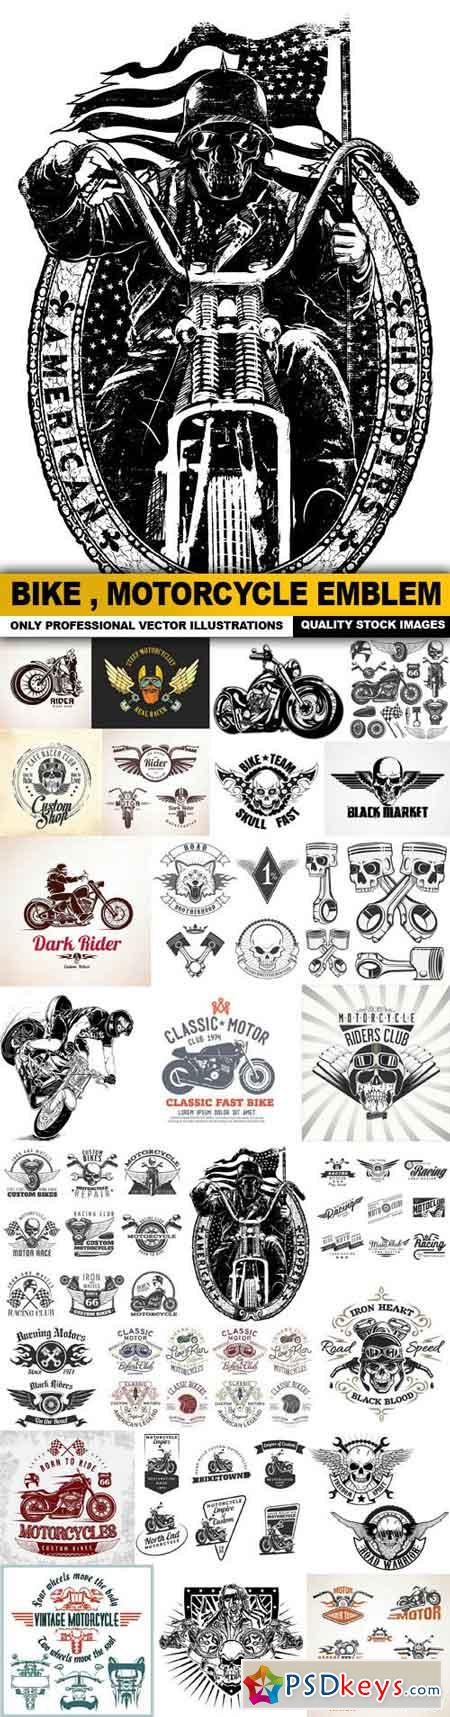 Bike , Motorcycle Emblem Collection - 26 Vector